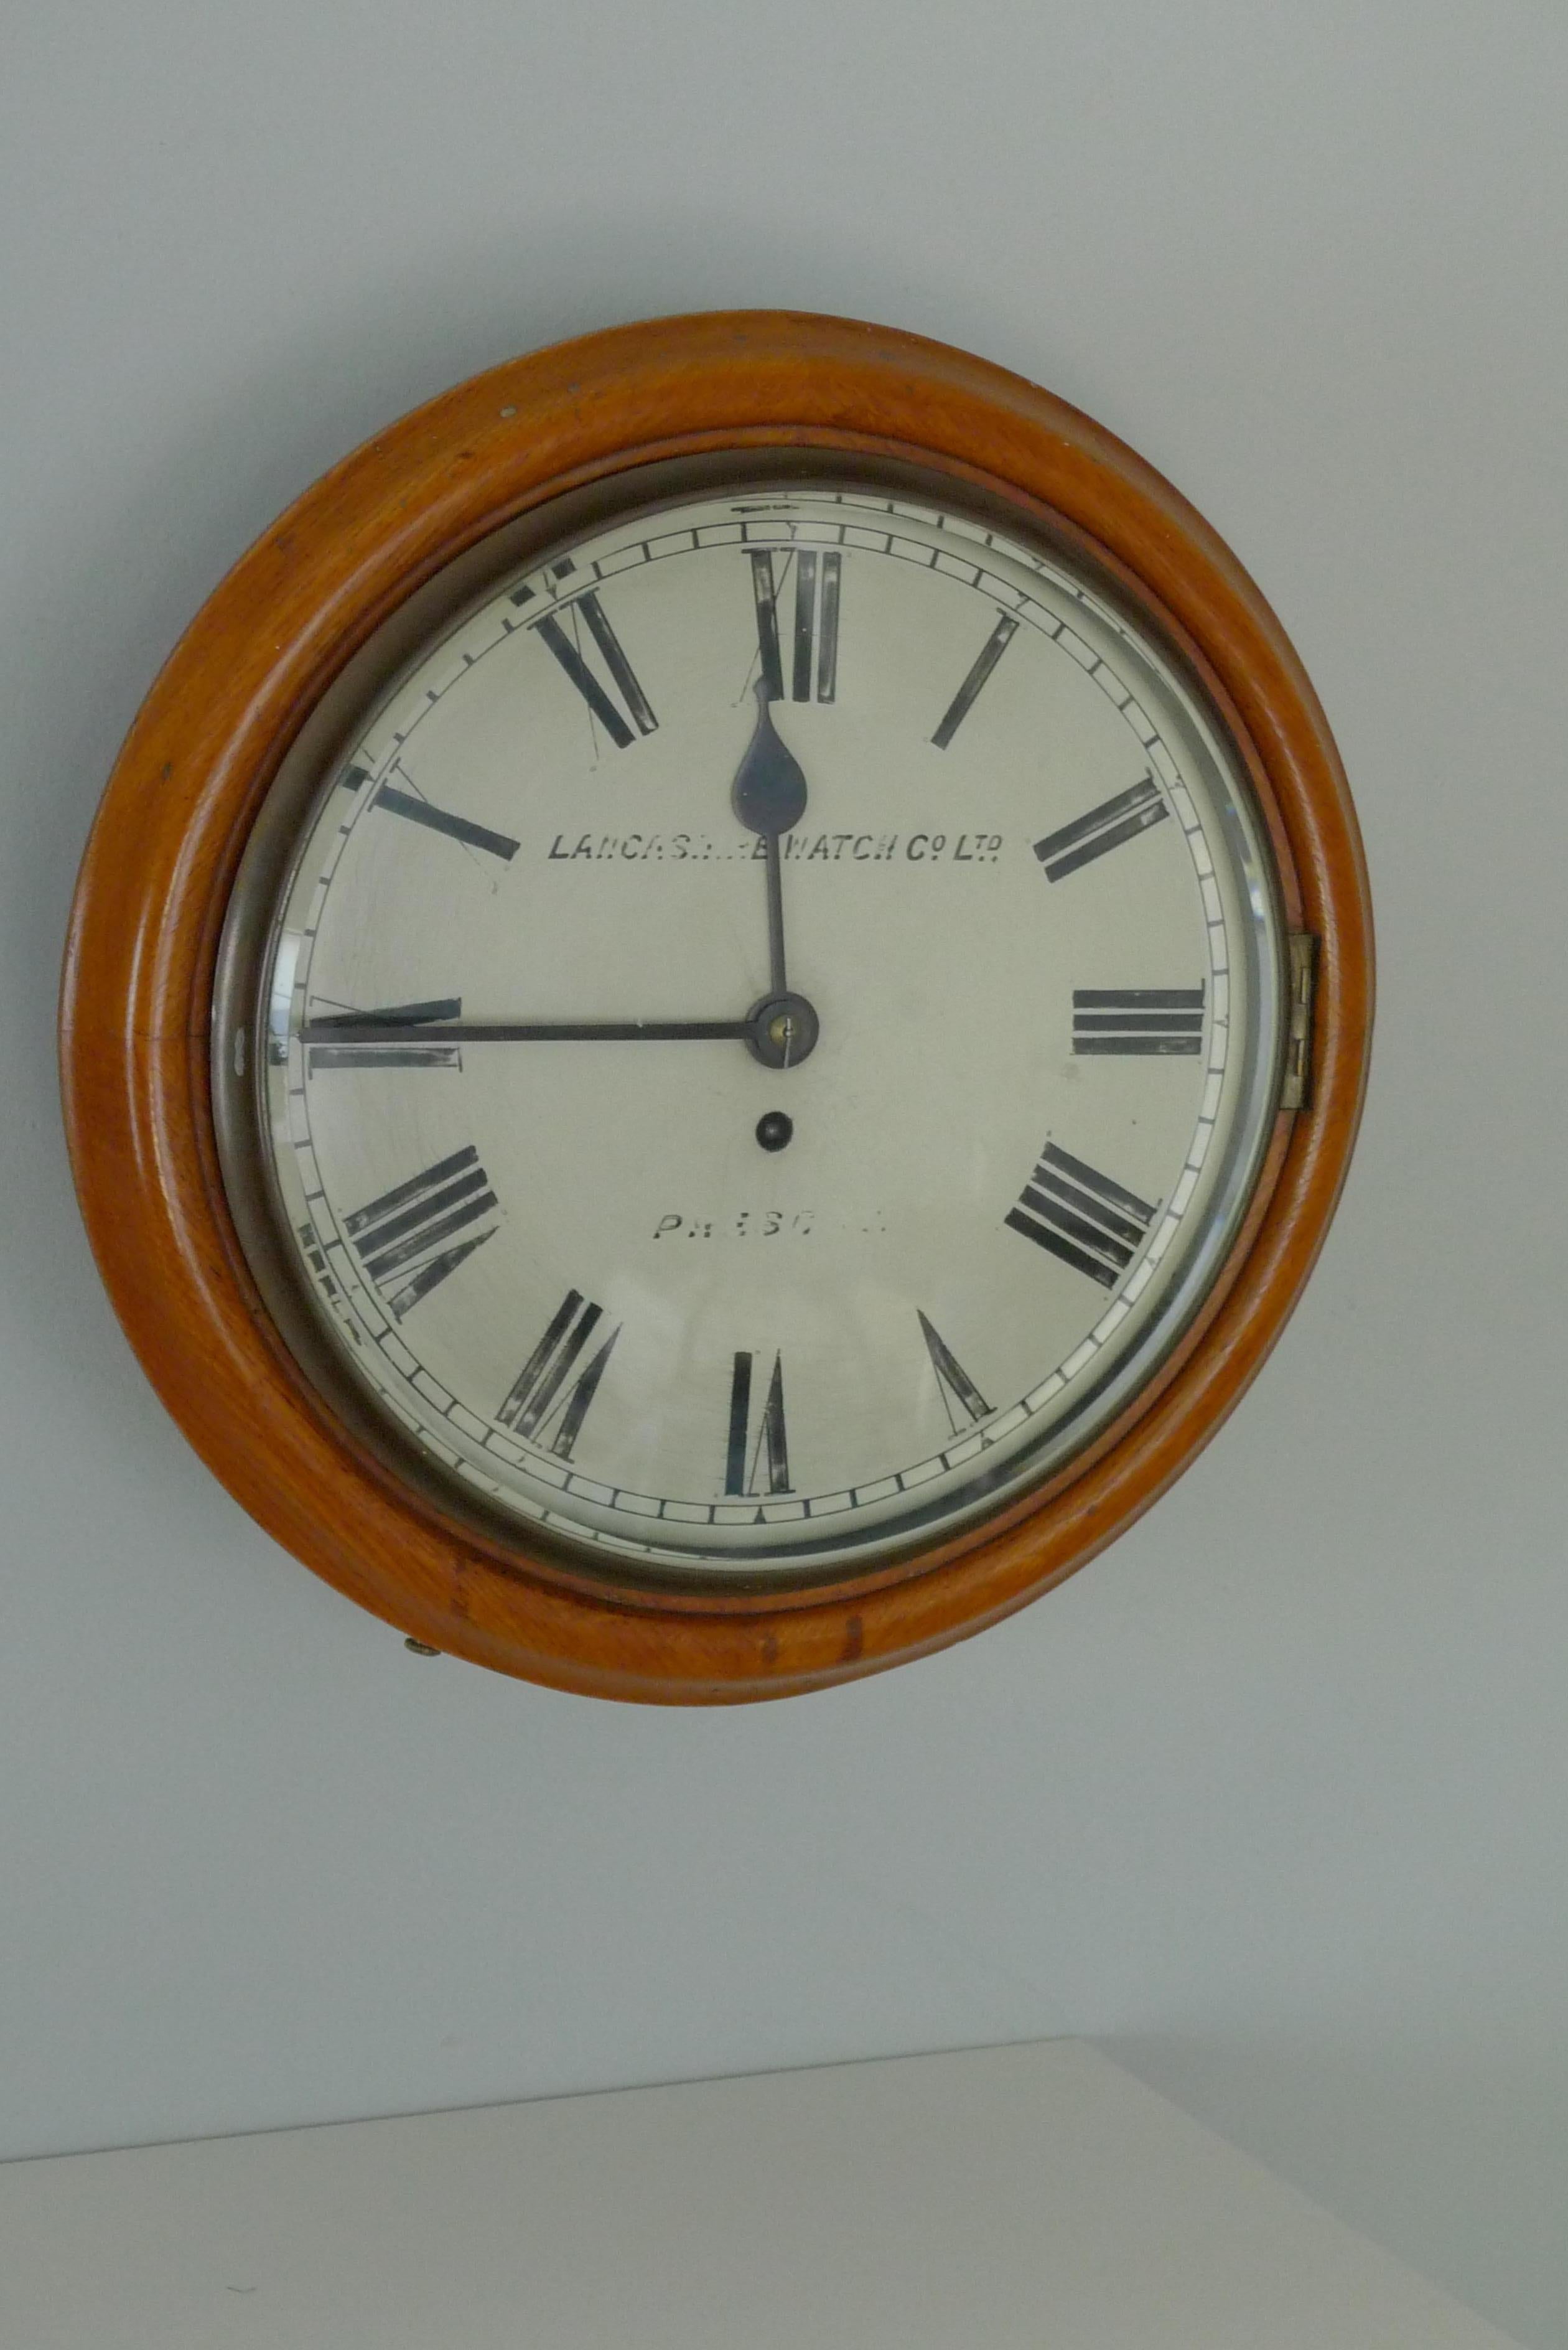 Brass Wall clock by Lancashire Watch Co. from rail station, late 19th cent. Ships free For Sale